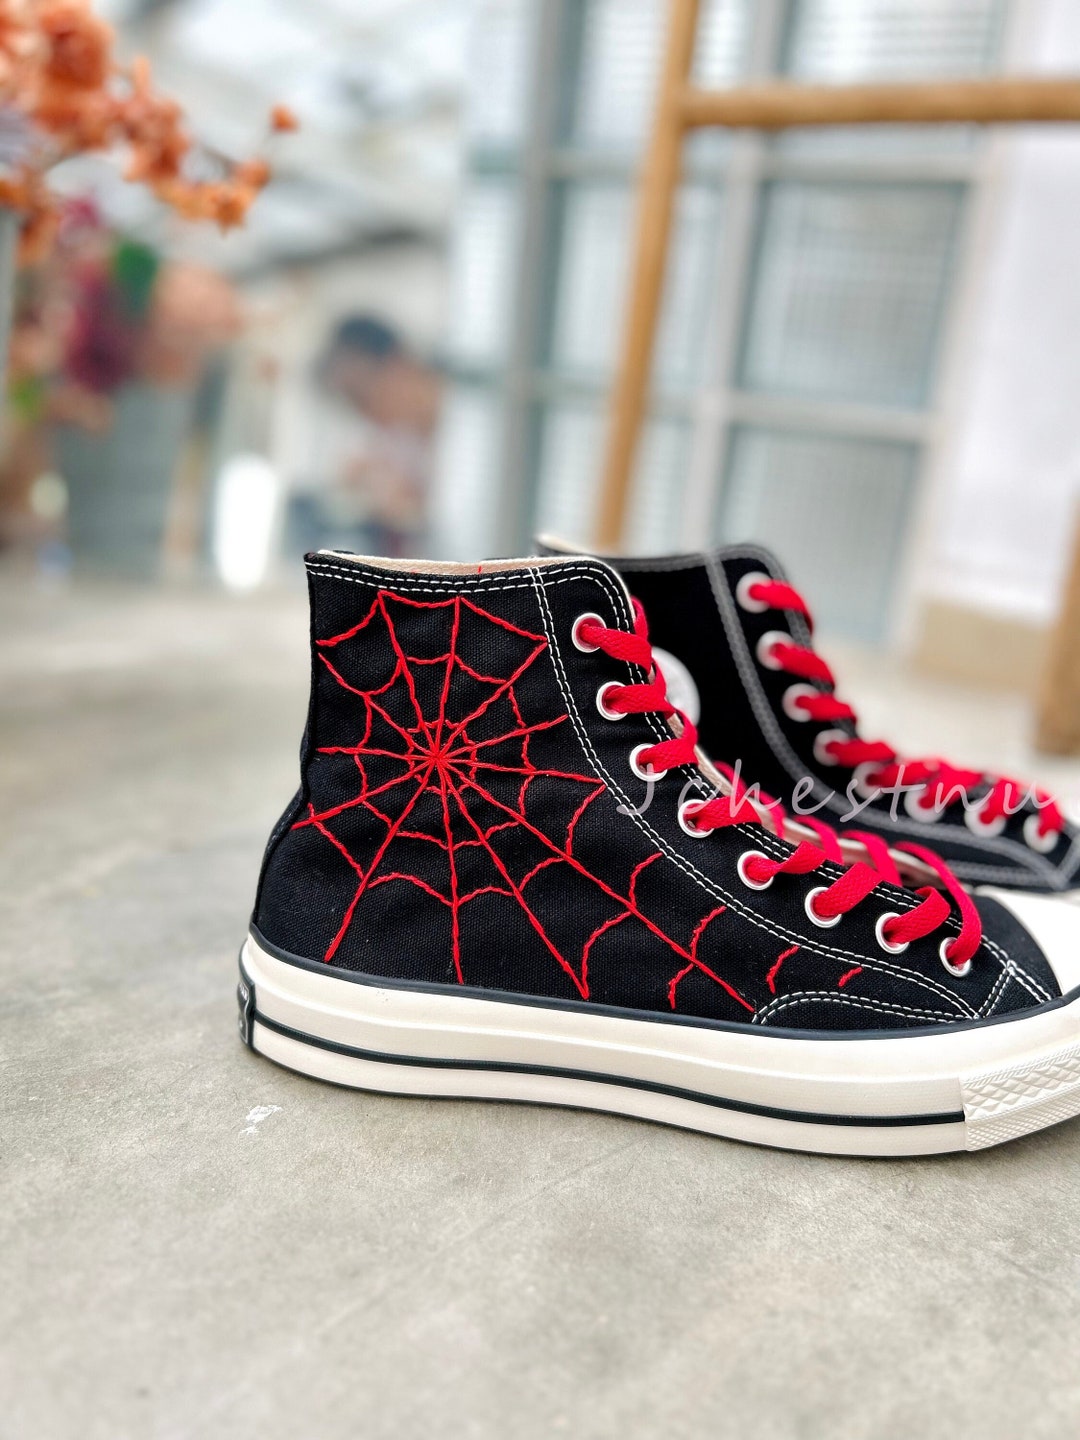 Custom Converse Chuck Taylor Embroidered Spider Silk, No Way Home